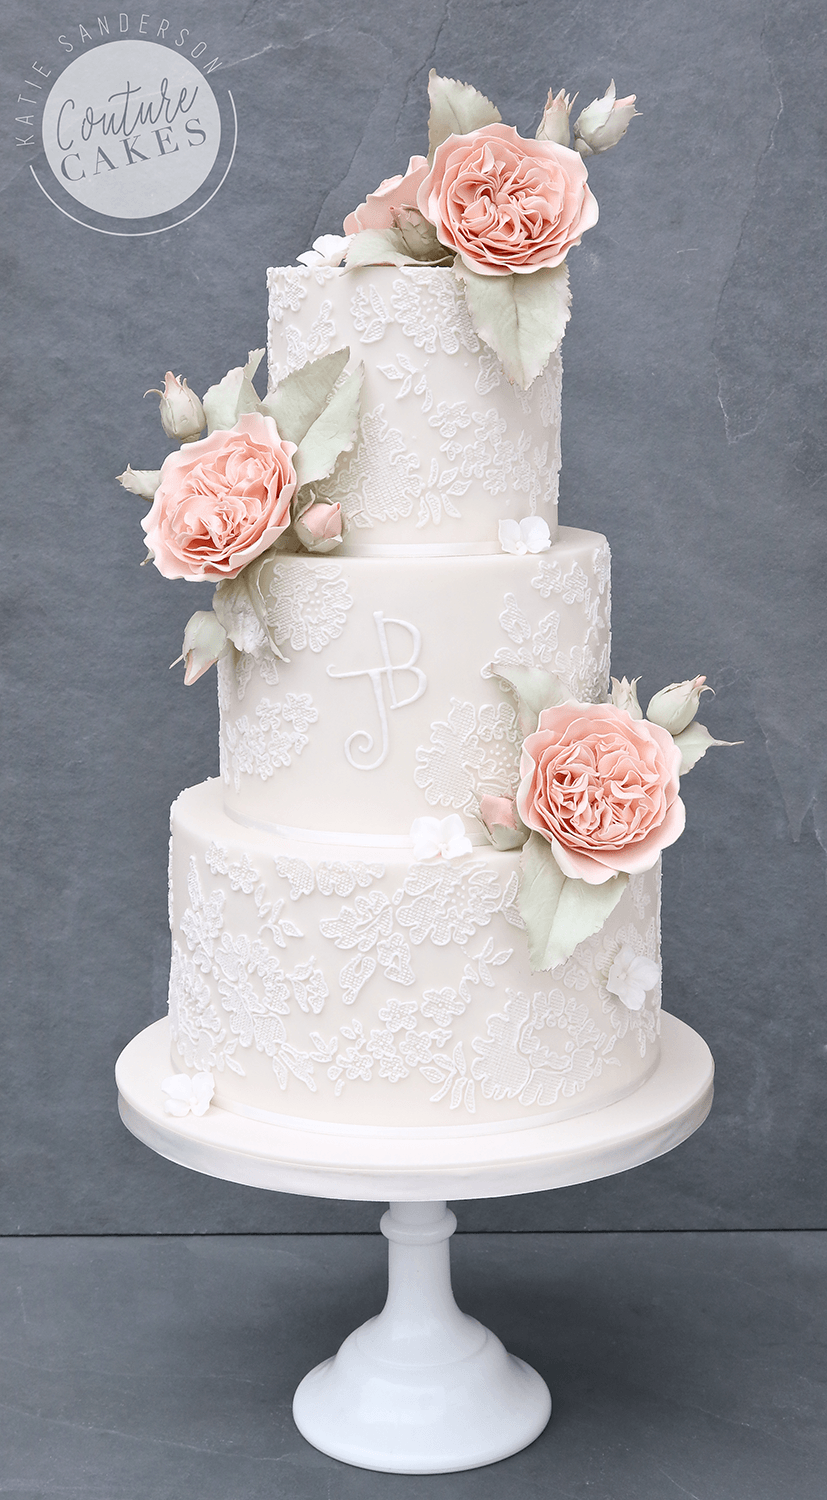 Lace Wedding Cake: Serves 100 portions, Price category D £649